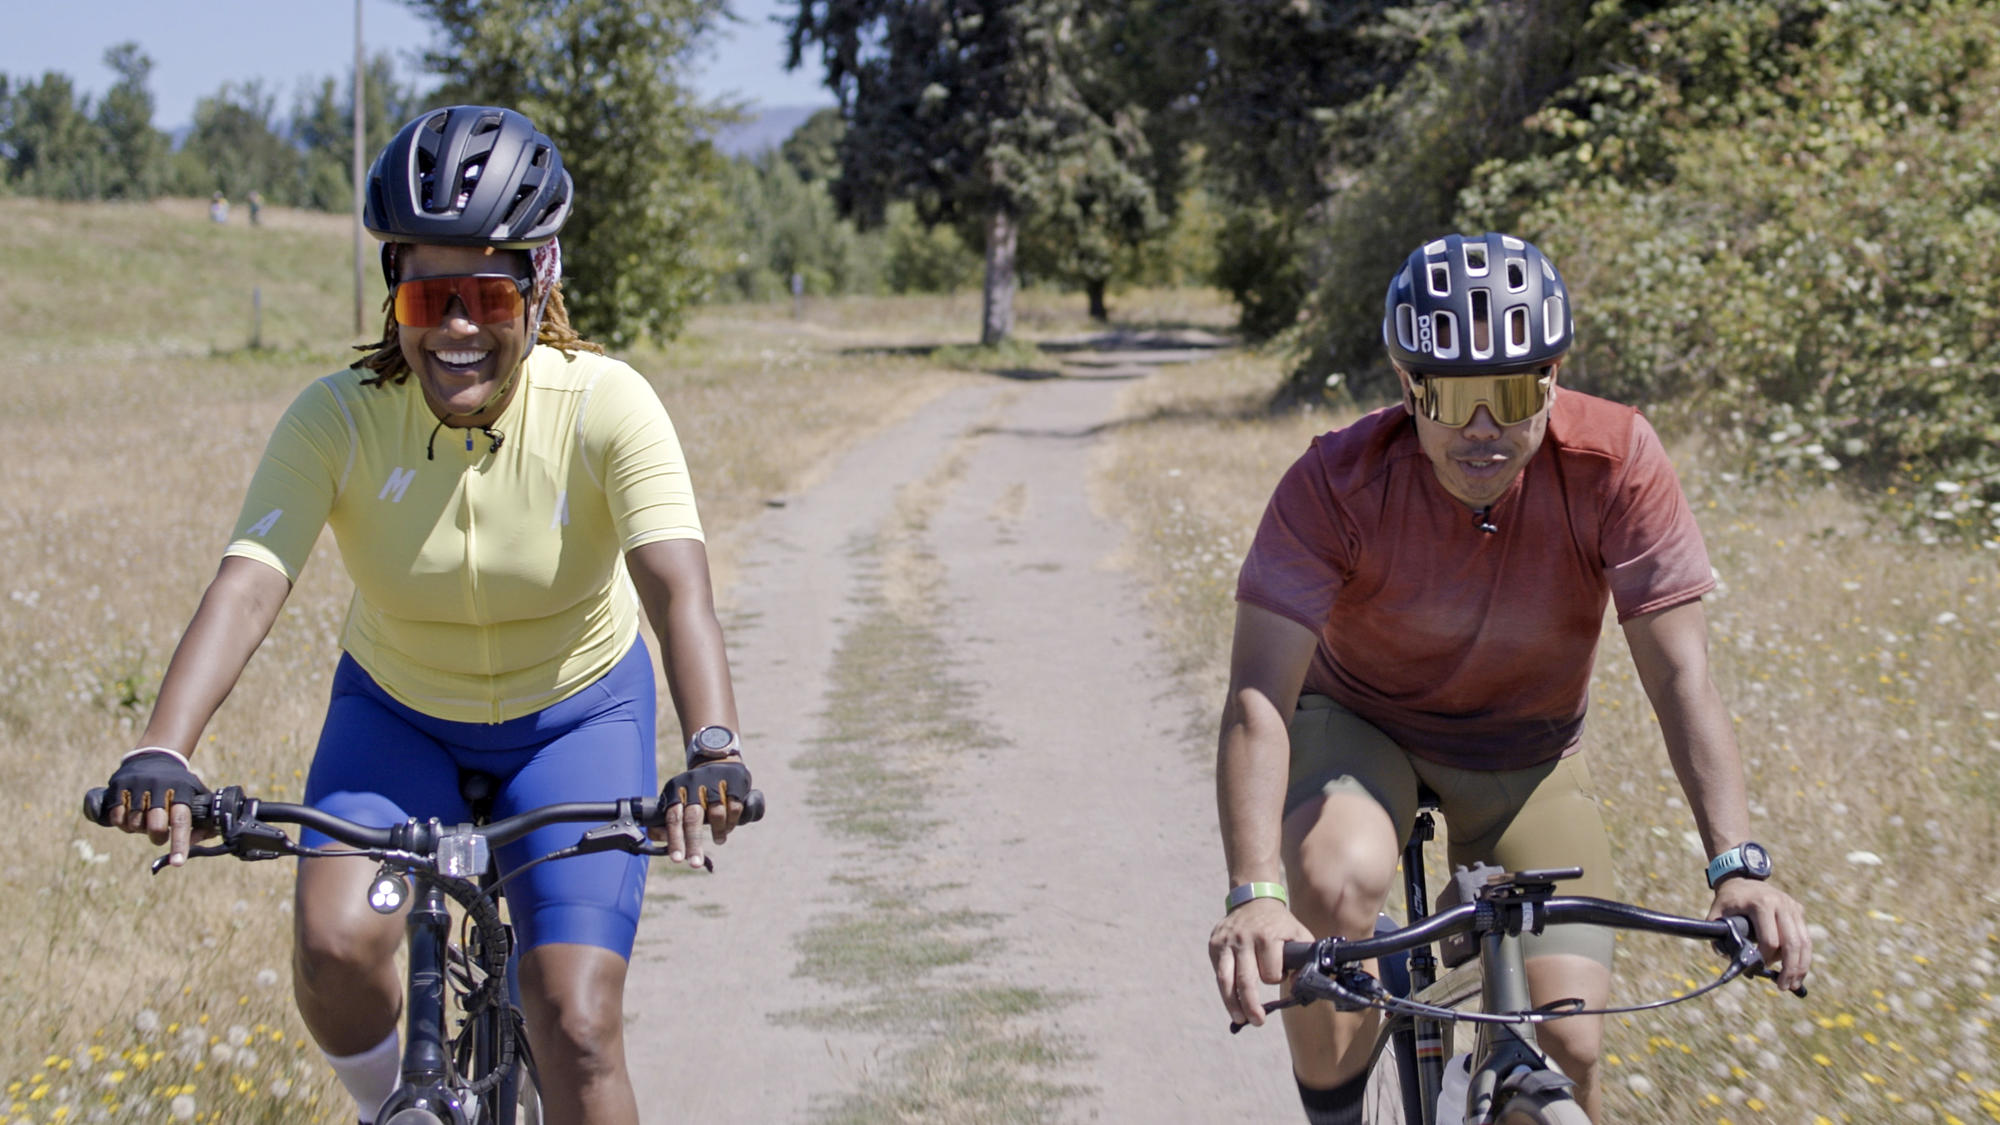 bipoc woman and man riding a bicycle on a gravel path